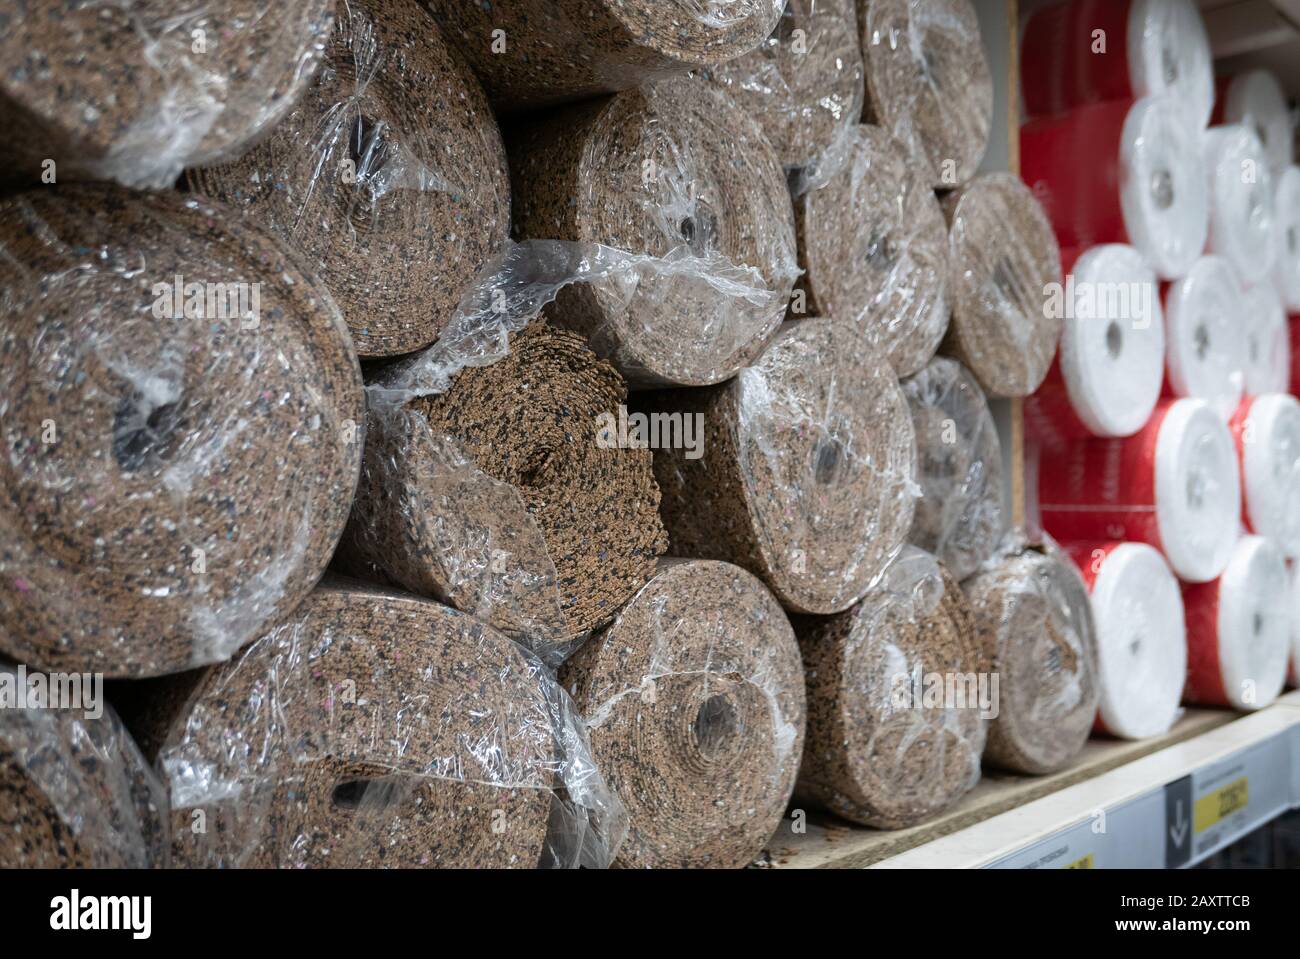 Cork Underlayment Rolls For The Laminate Flooring In A Shop Stock